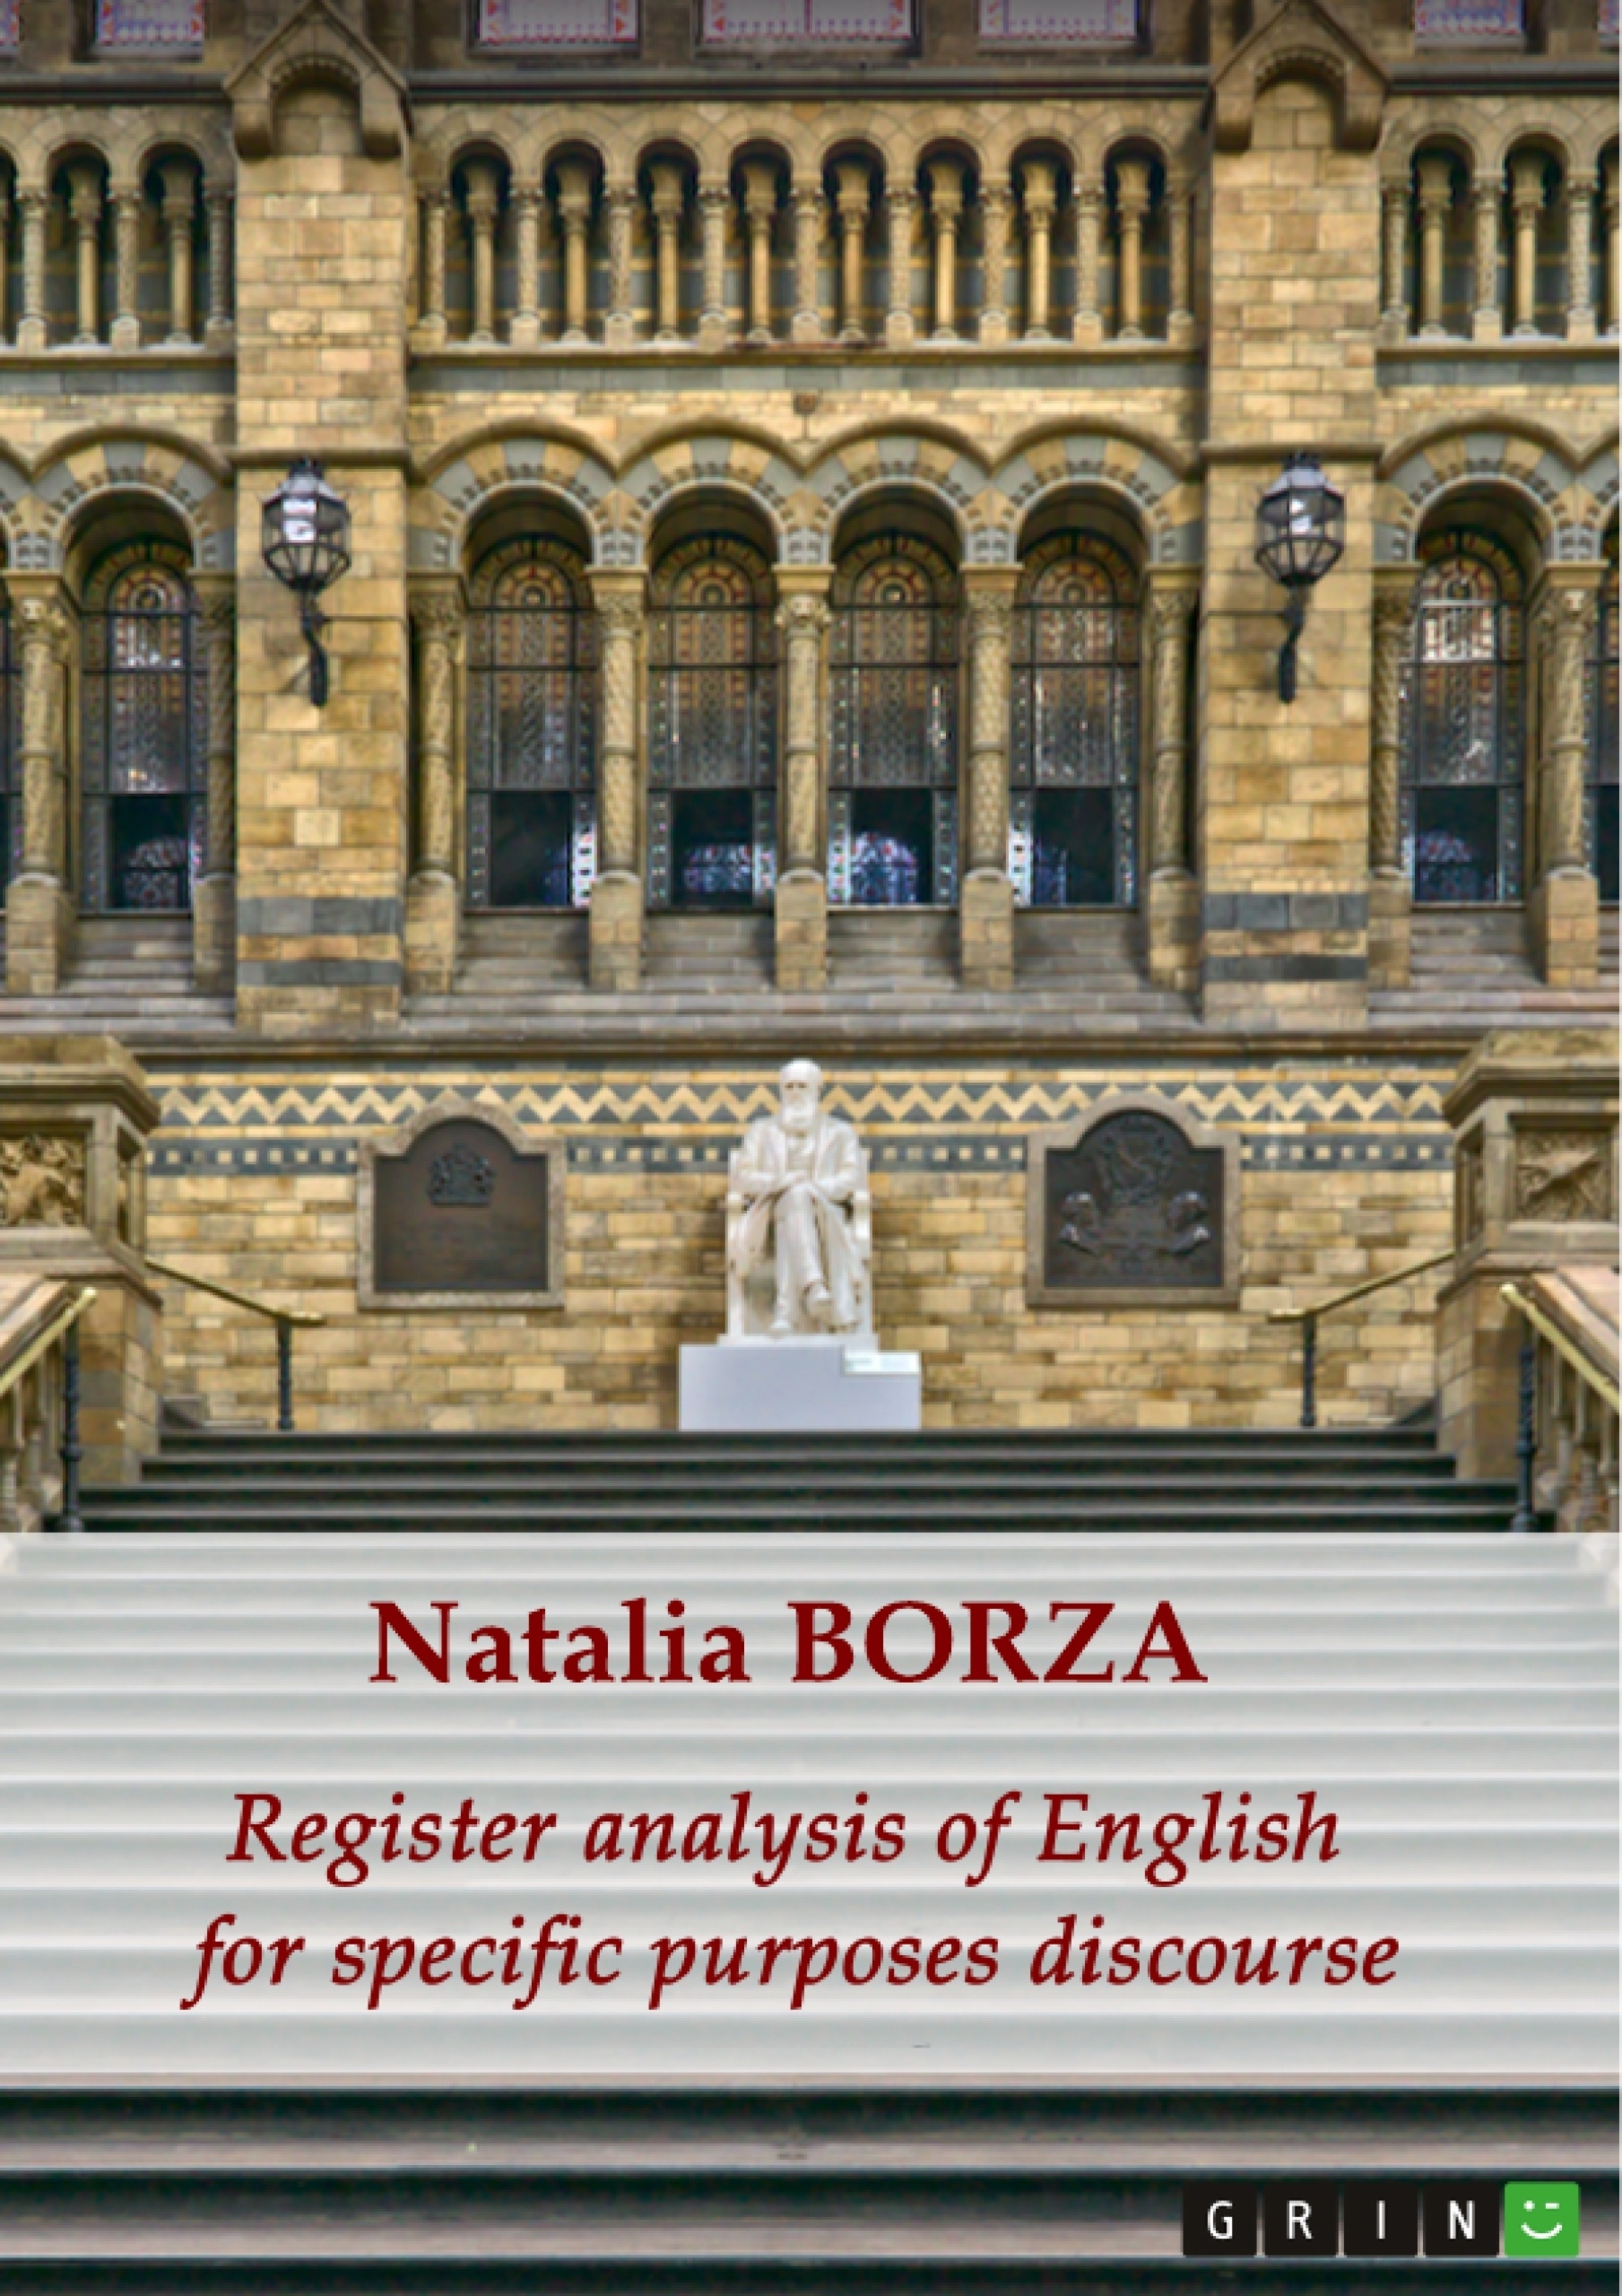 Title: Register analysis of English for specific purposes discourse